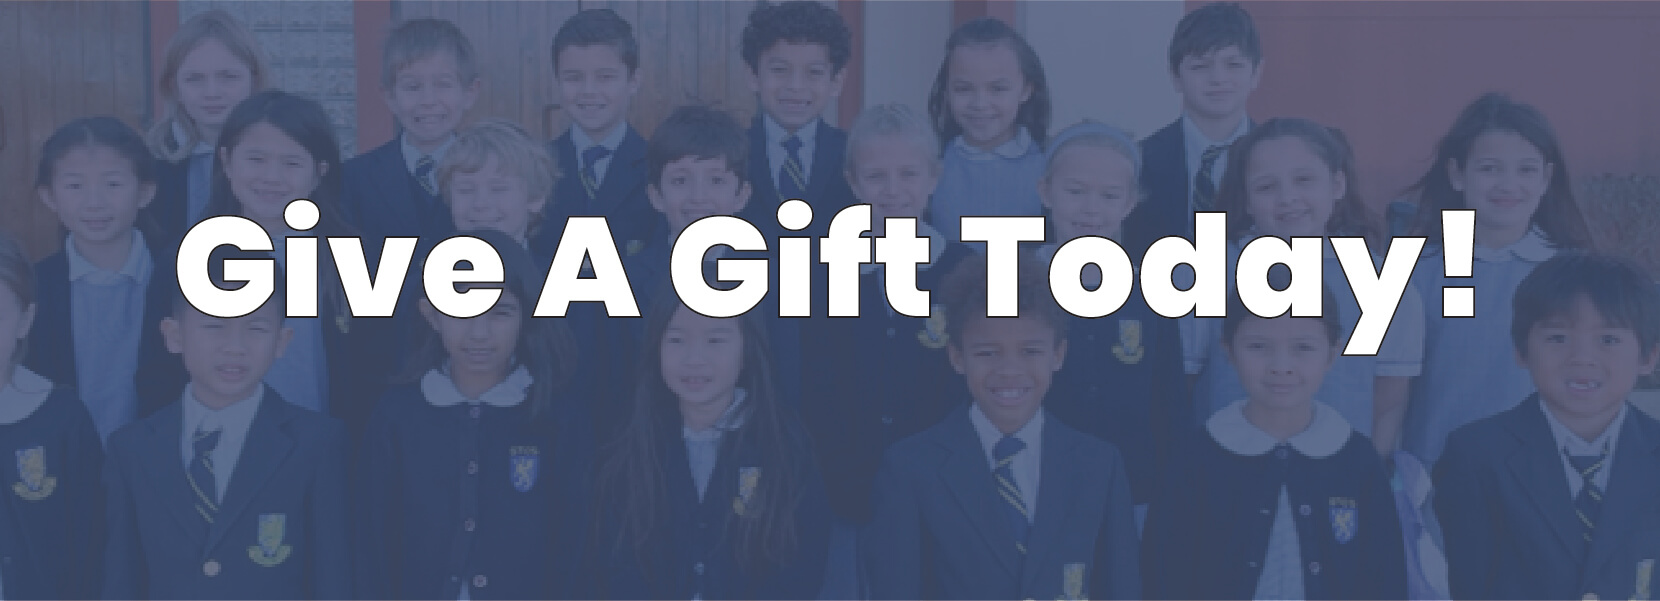 Give a Gift Today!